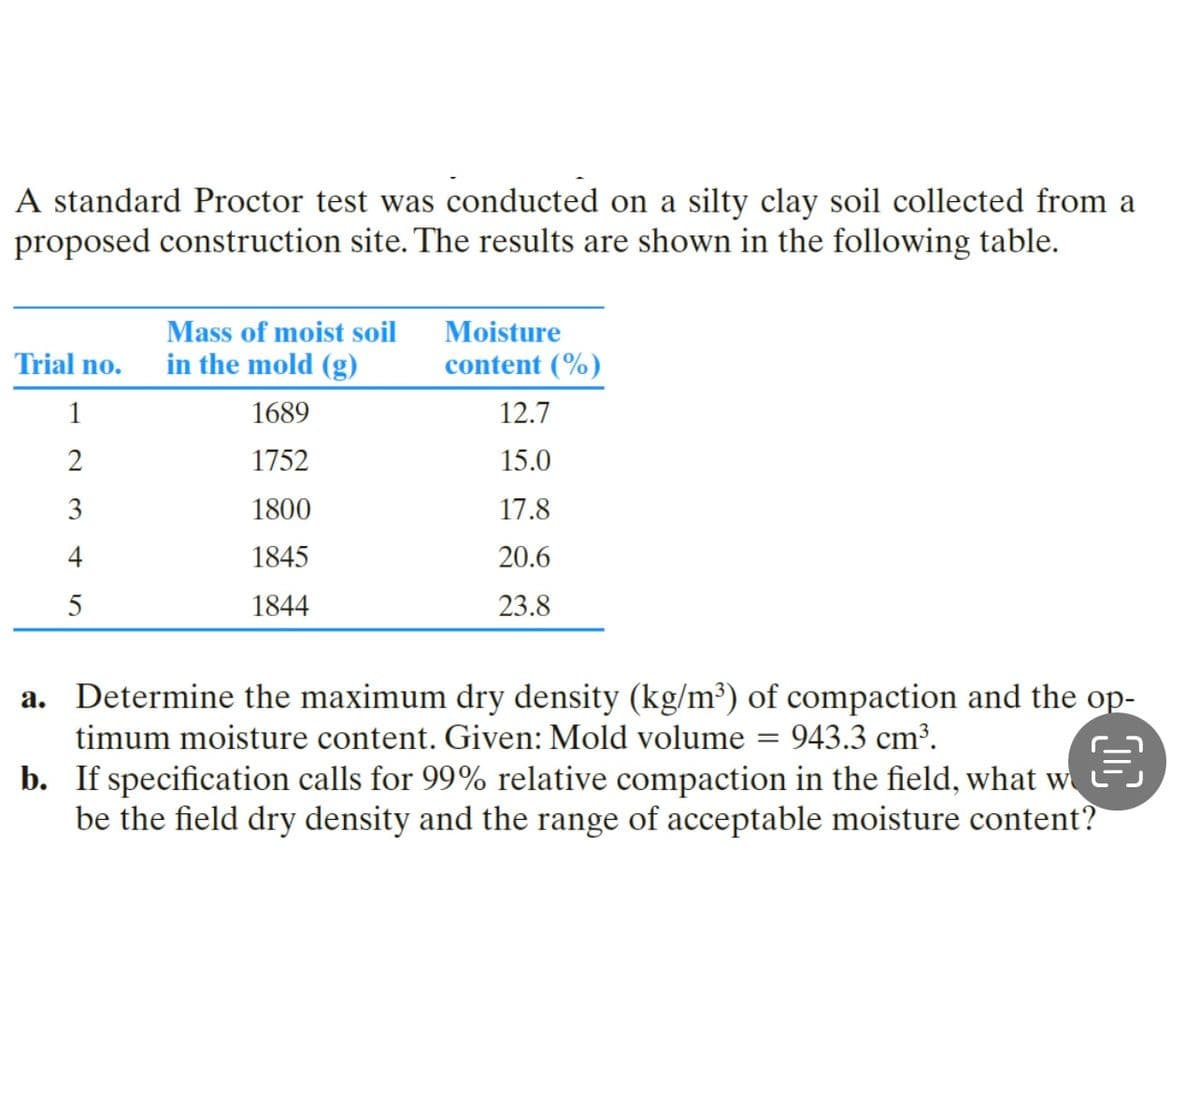 A standard Proctor test was conducted on a silty clay soil collected from a
proposed construction site. The results are shown in the following table.
Moisture
content (%)
Trial no.
Mass of moist soil
in the mold (g)
1
1689
12.7
2
1752
15.0
1800
17.8
4
1845
20.6
5
1844
23.8
a. Determine the maximum dry density (kg/m³) of compaction and the op-
timum moisture content. Given: Mold volume = 943.3 cm³.
b. If specification calls for 99% relative compaction in the field, what w
be the field dry density and the range of acceptable moisture content?